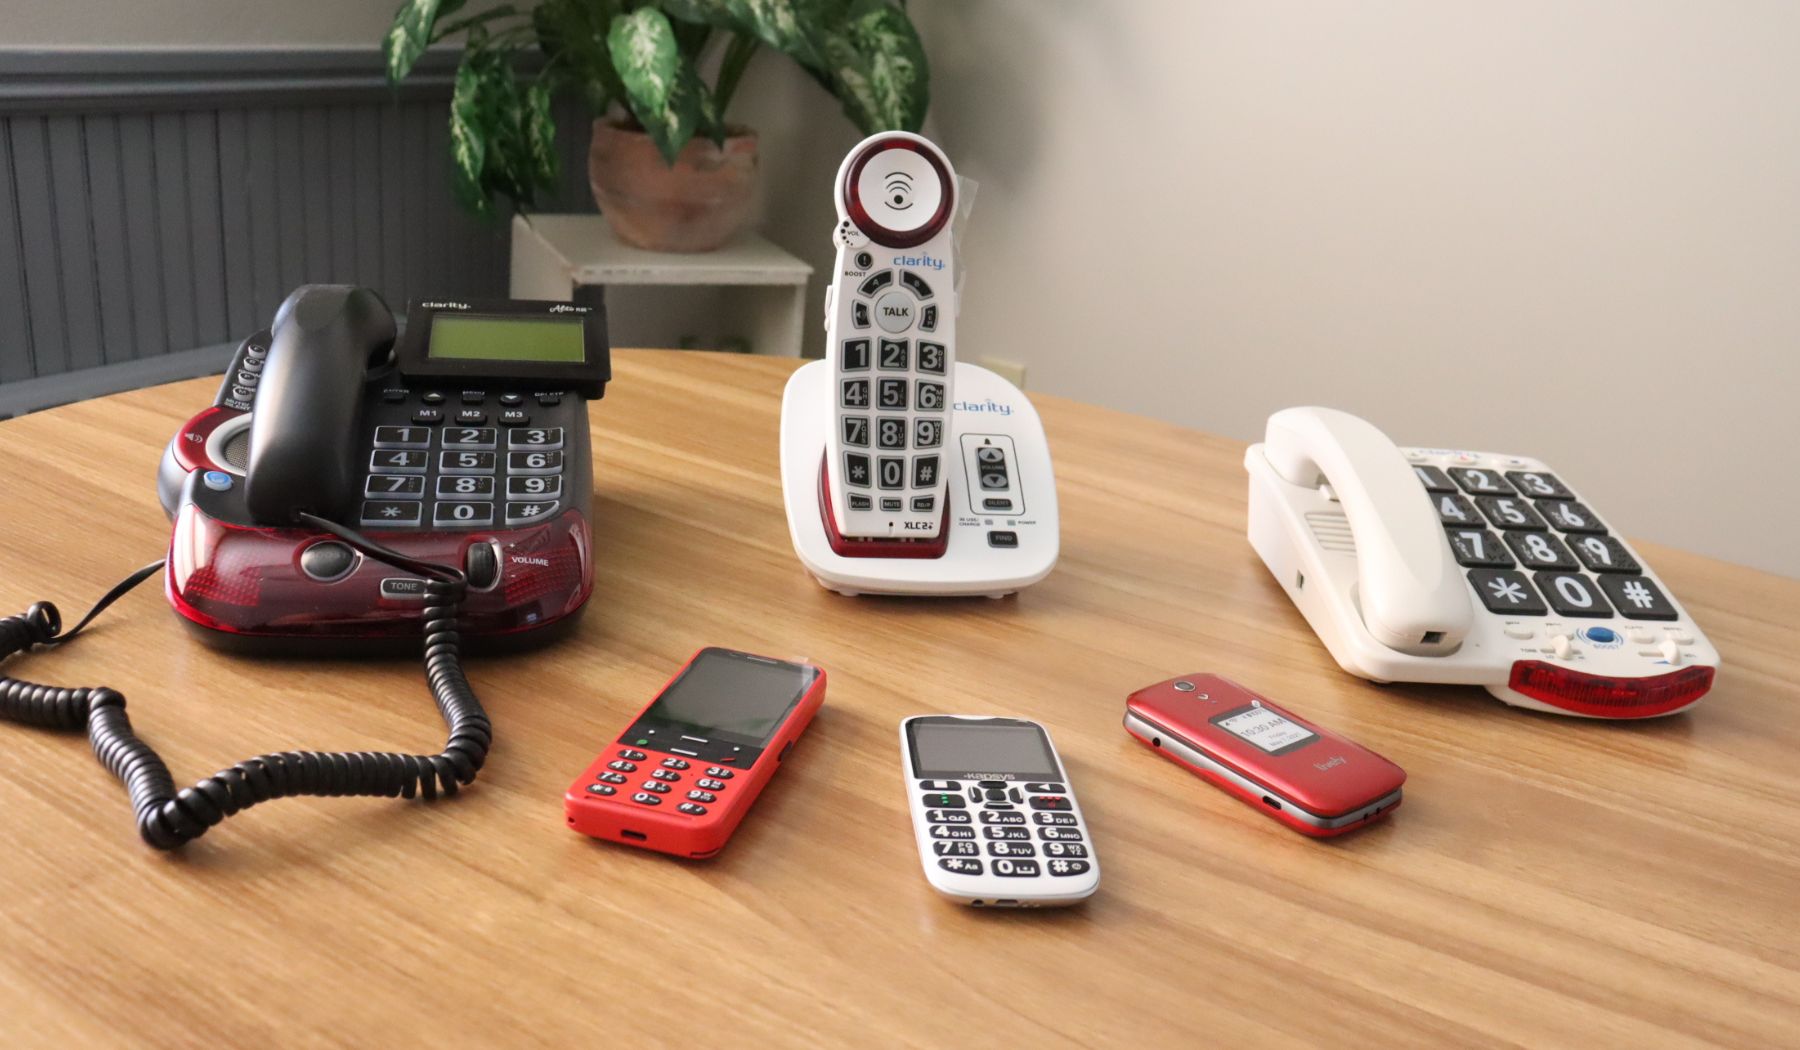 assortment of TEAP telephones and cellphones arranged on a table